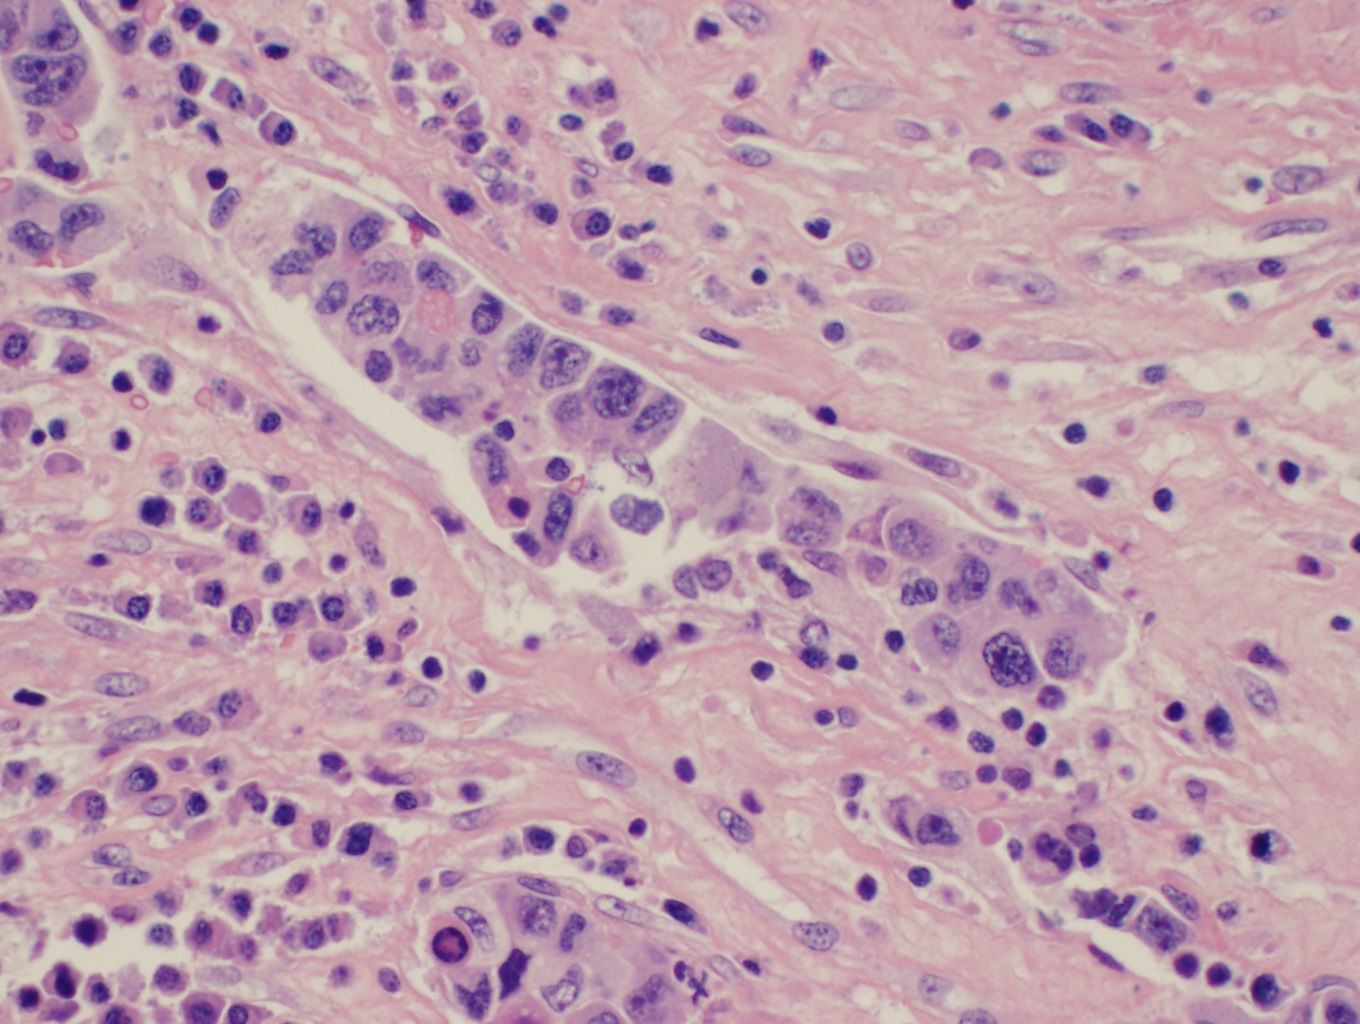 Sinusoidal involvement by anaplastic large cell lymphoma mimicking carcinoma. 